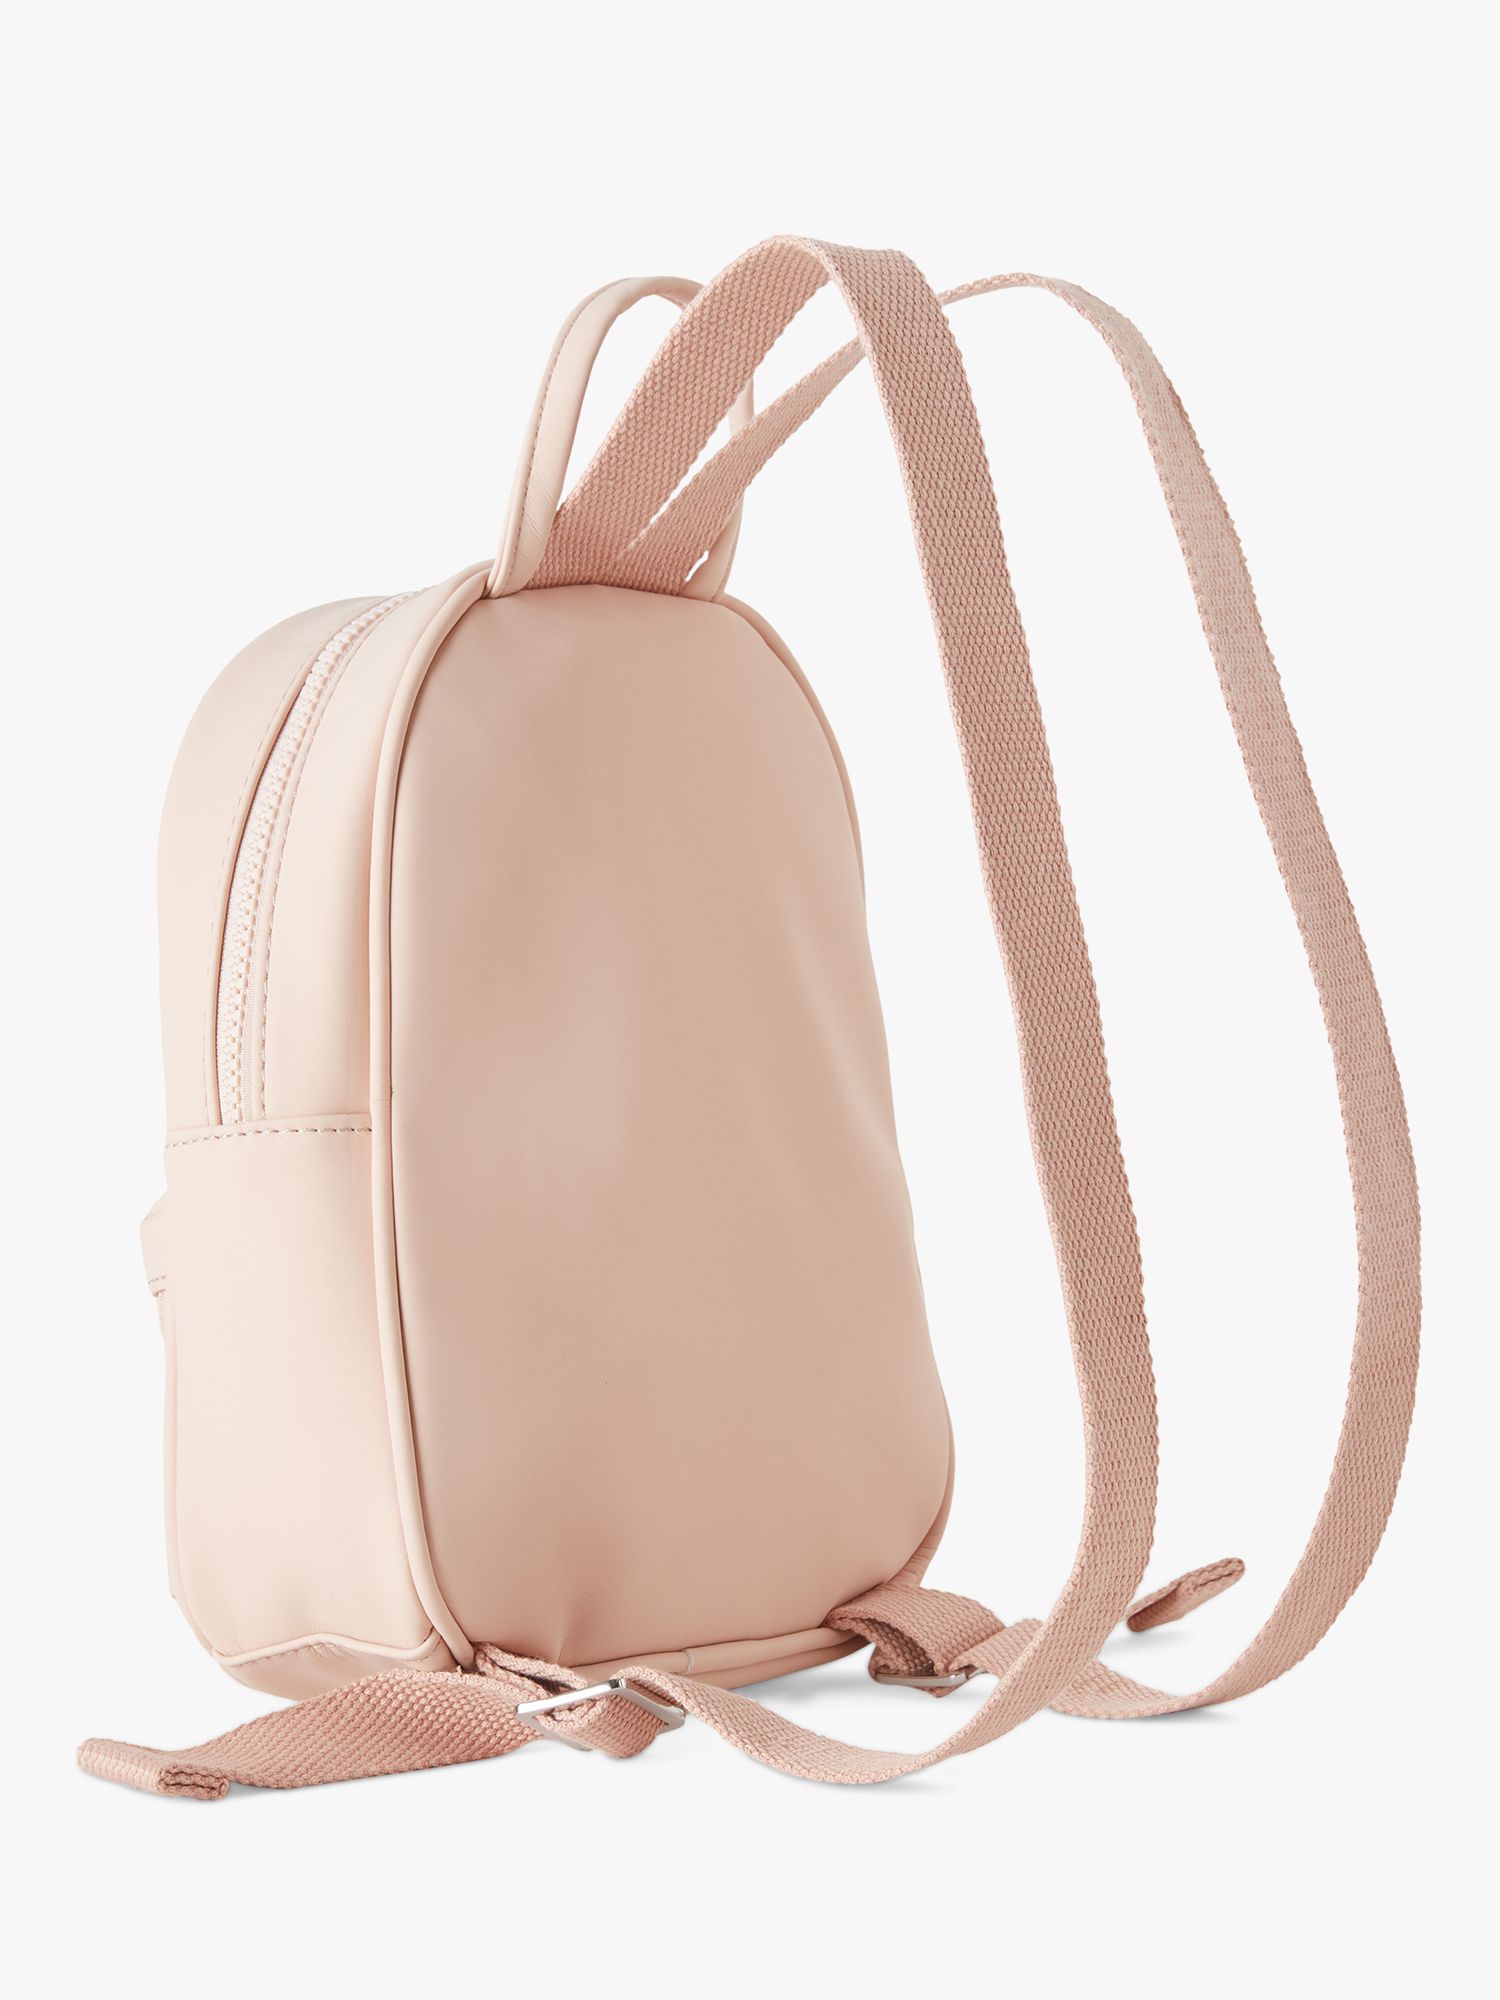 Benetton Kids' Logo Leatherette Backpack, Peach, One Size